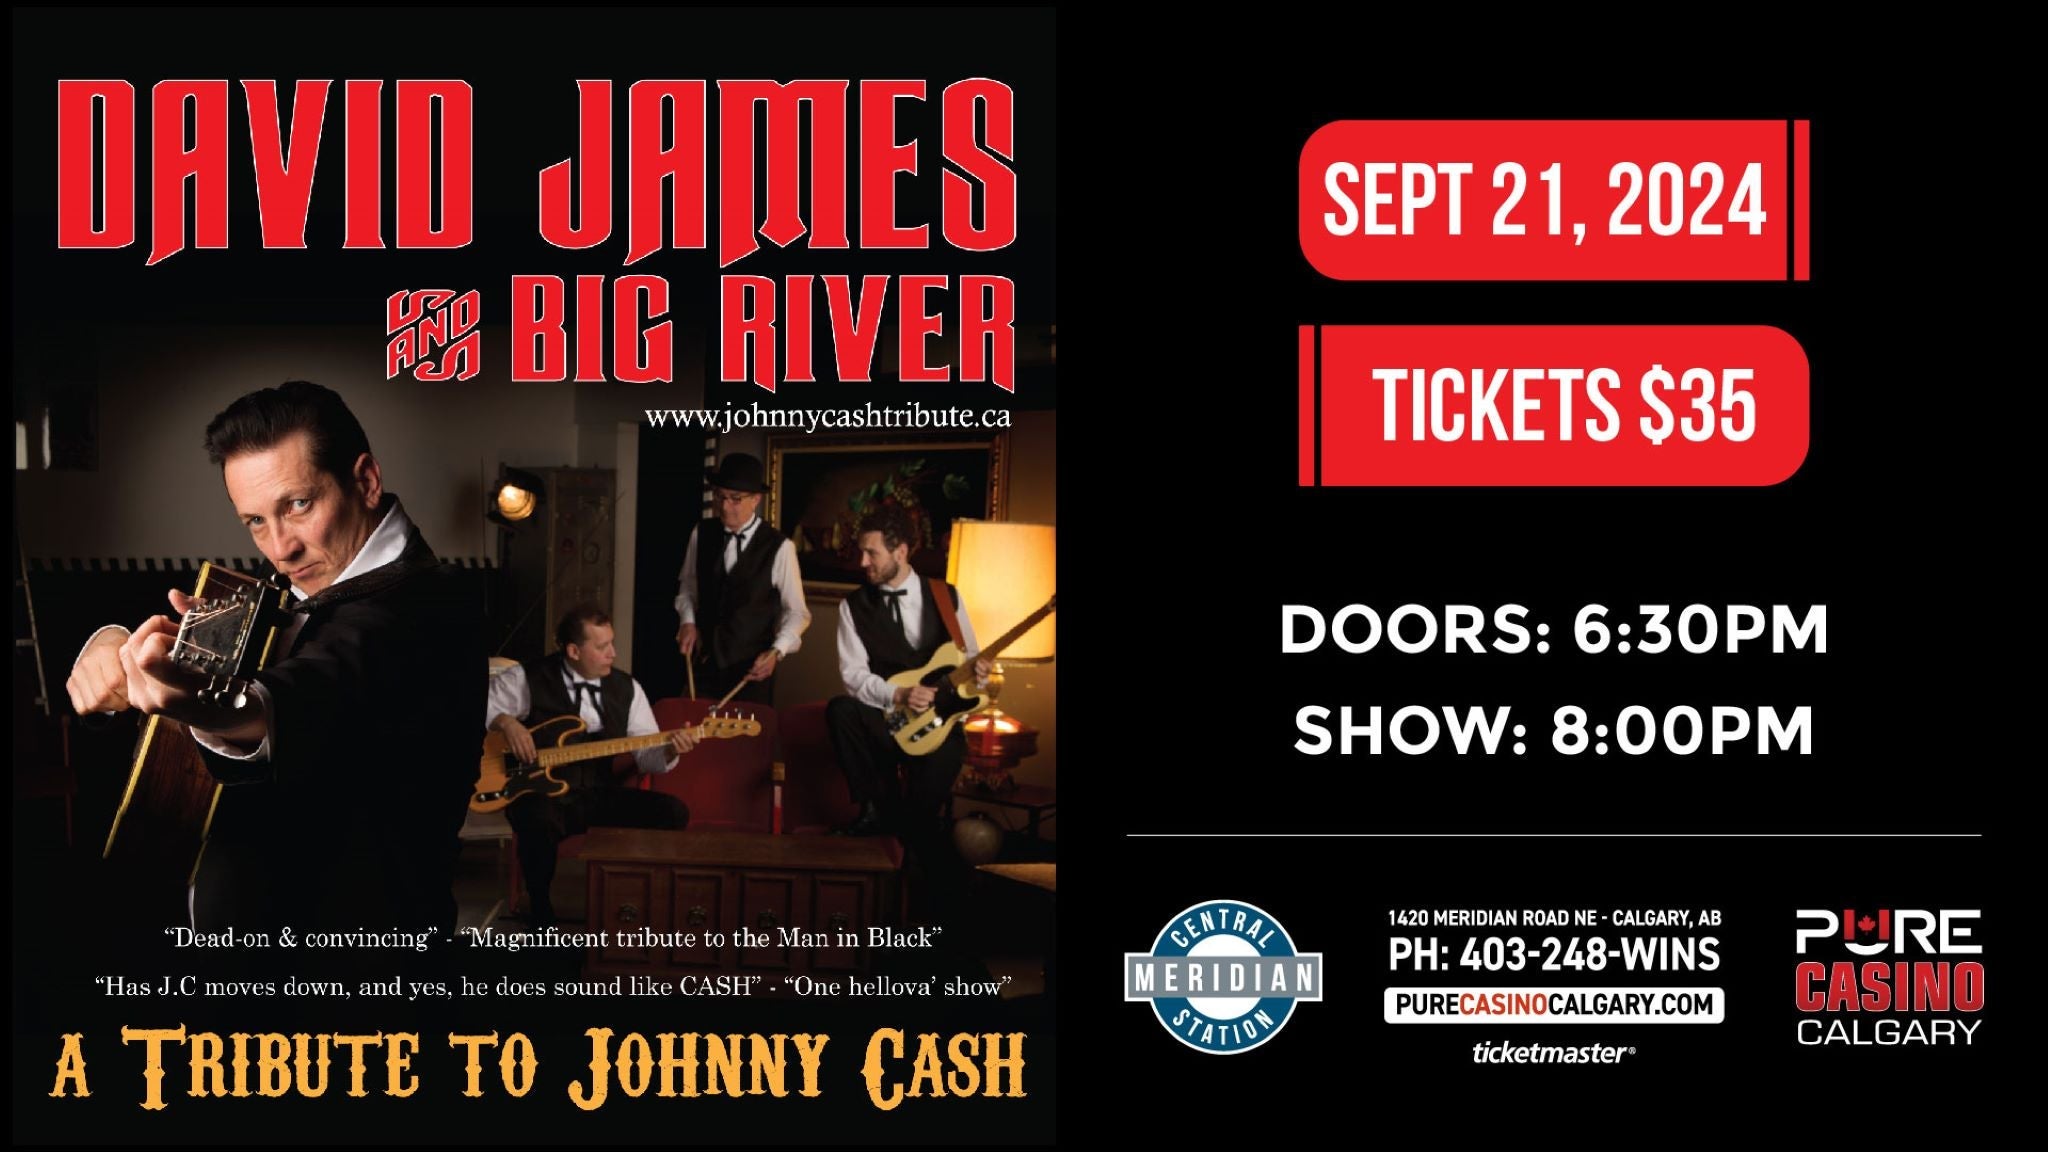 Almost Johnny Cash with David James and Big River